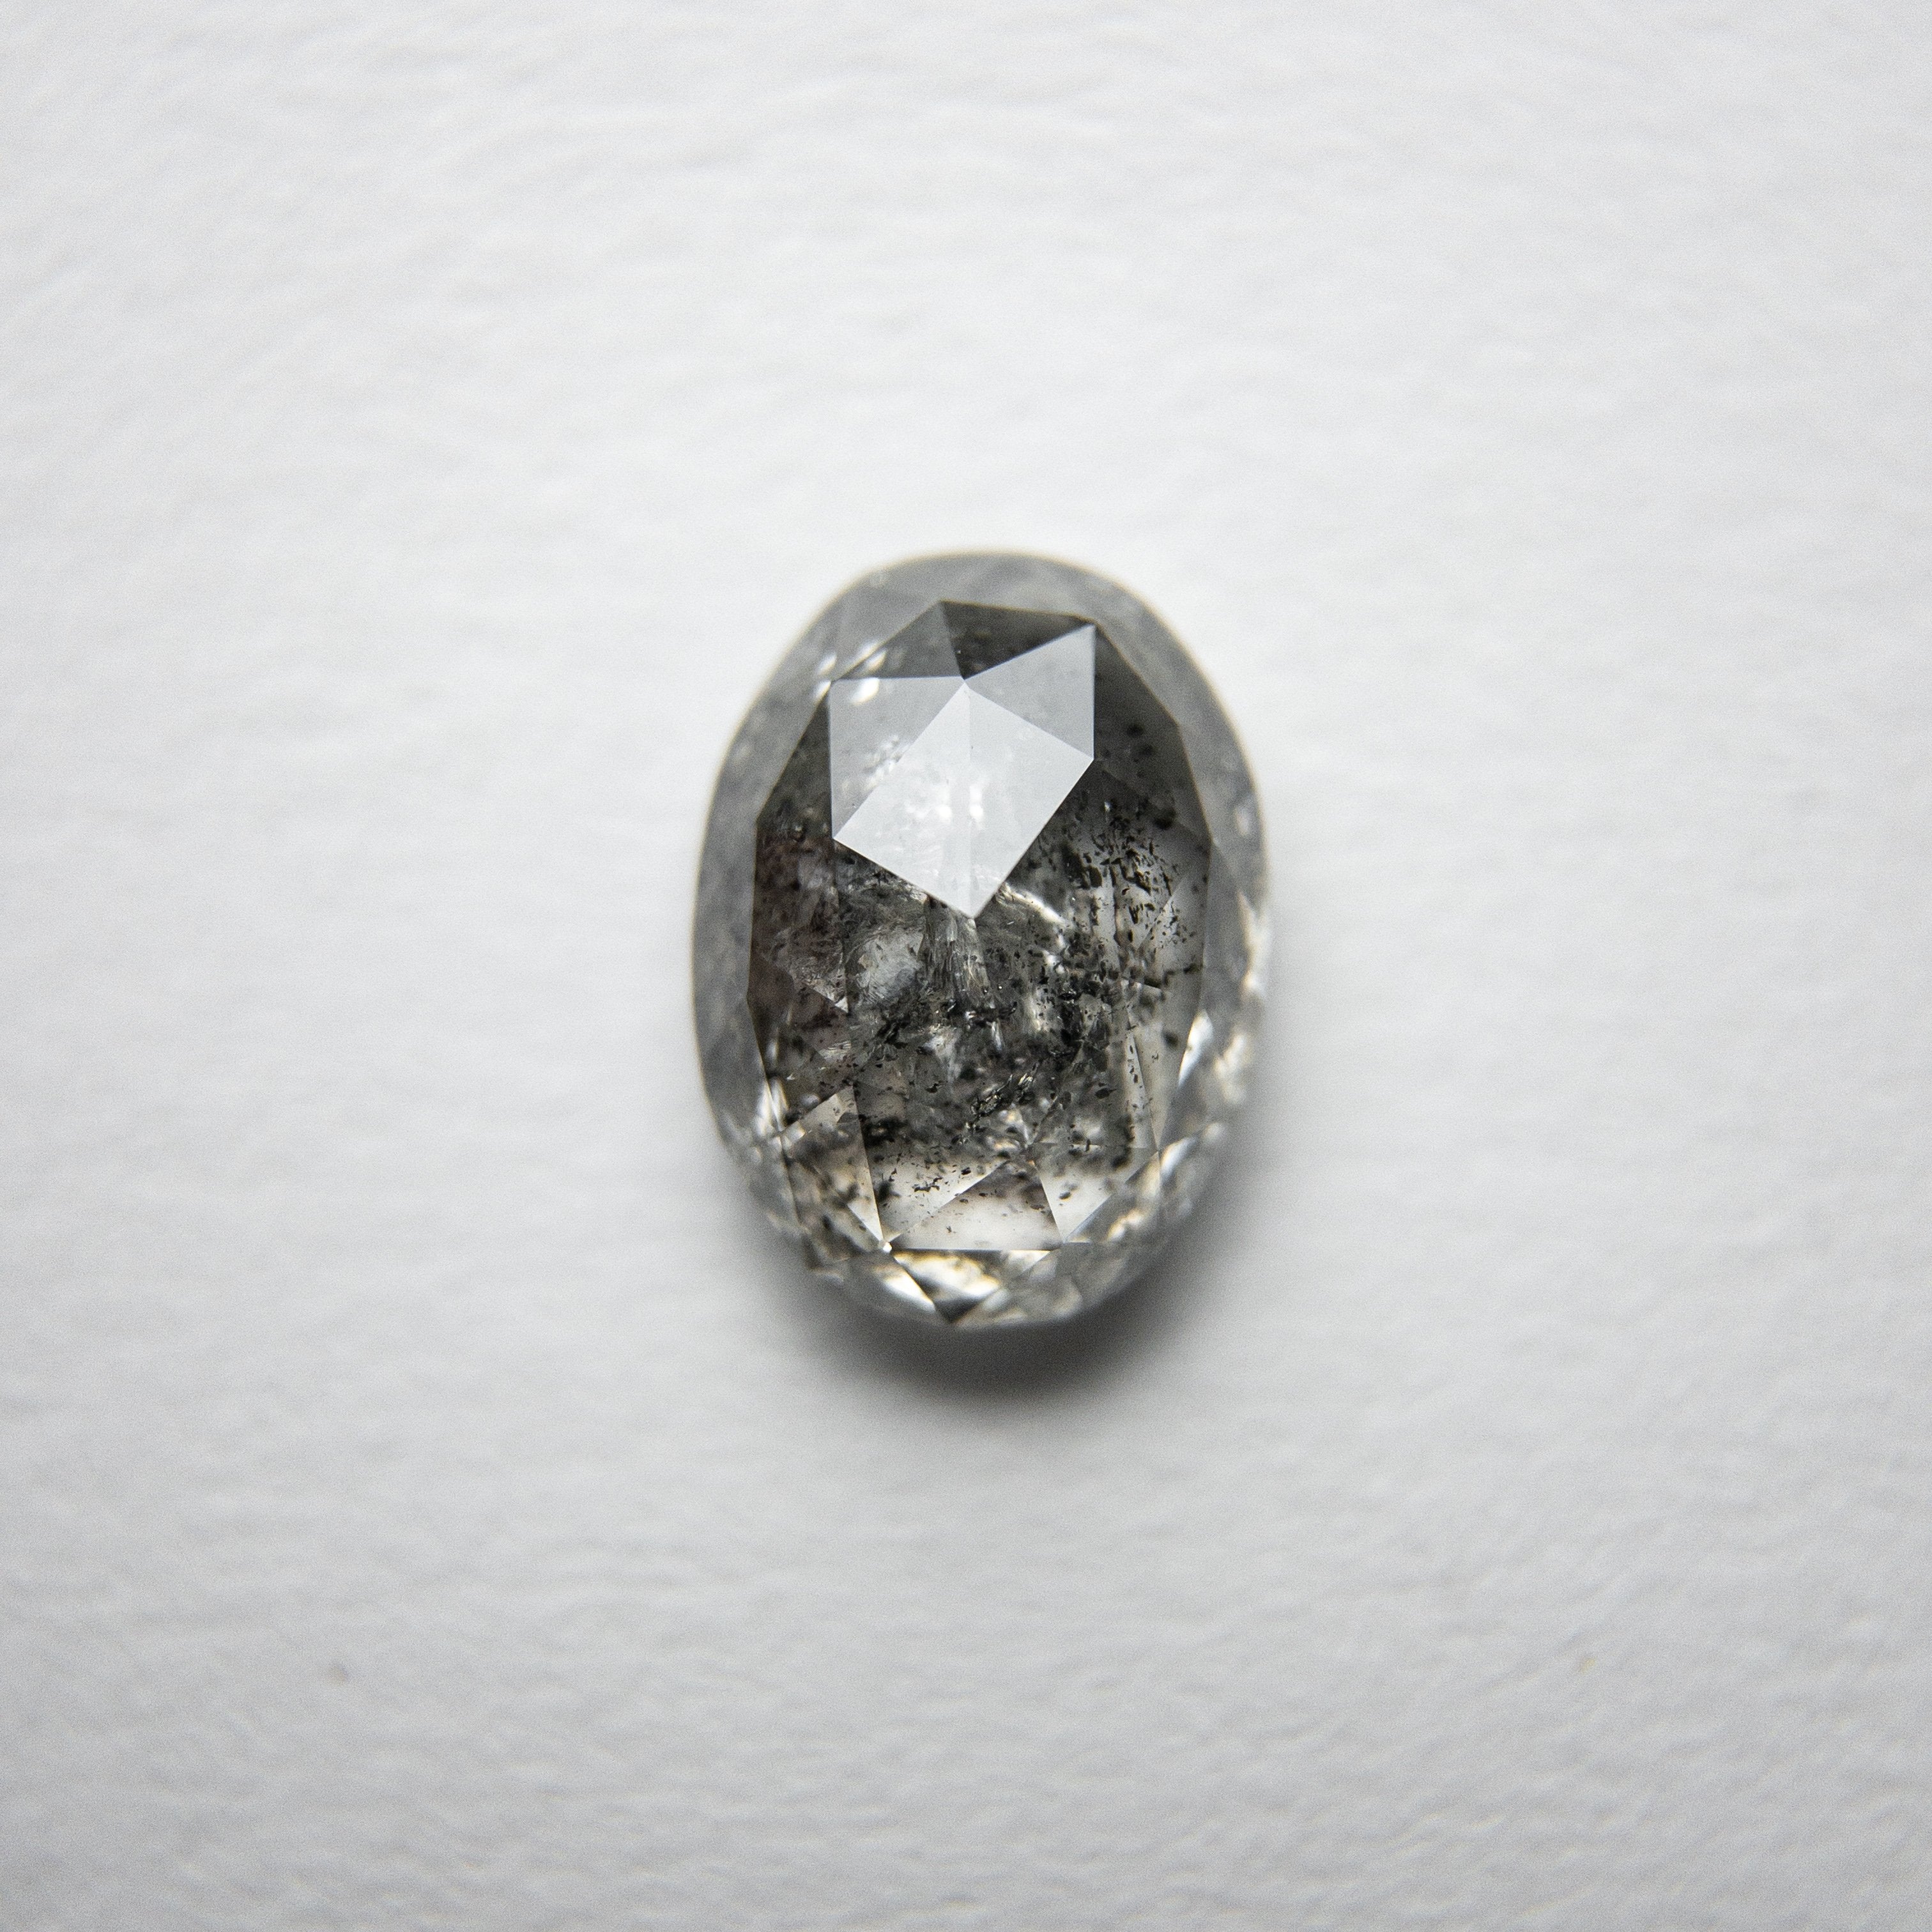 1.13ct 7.61x5.65x2.85mm Oval Double Cut 18219-04